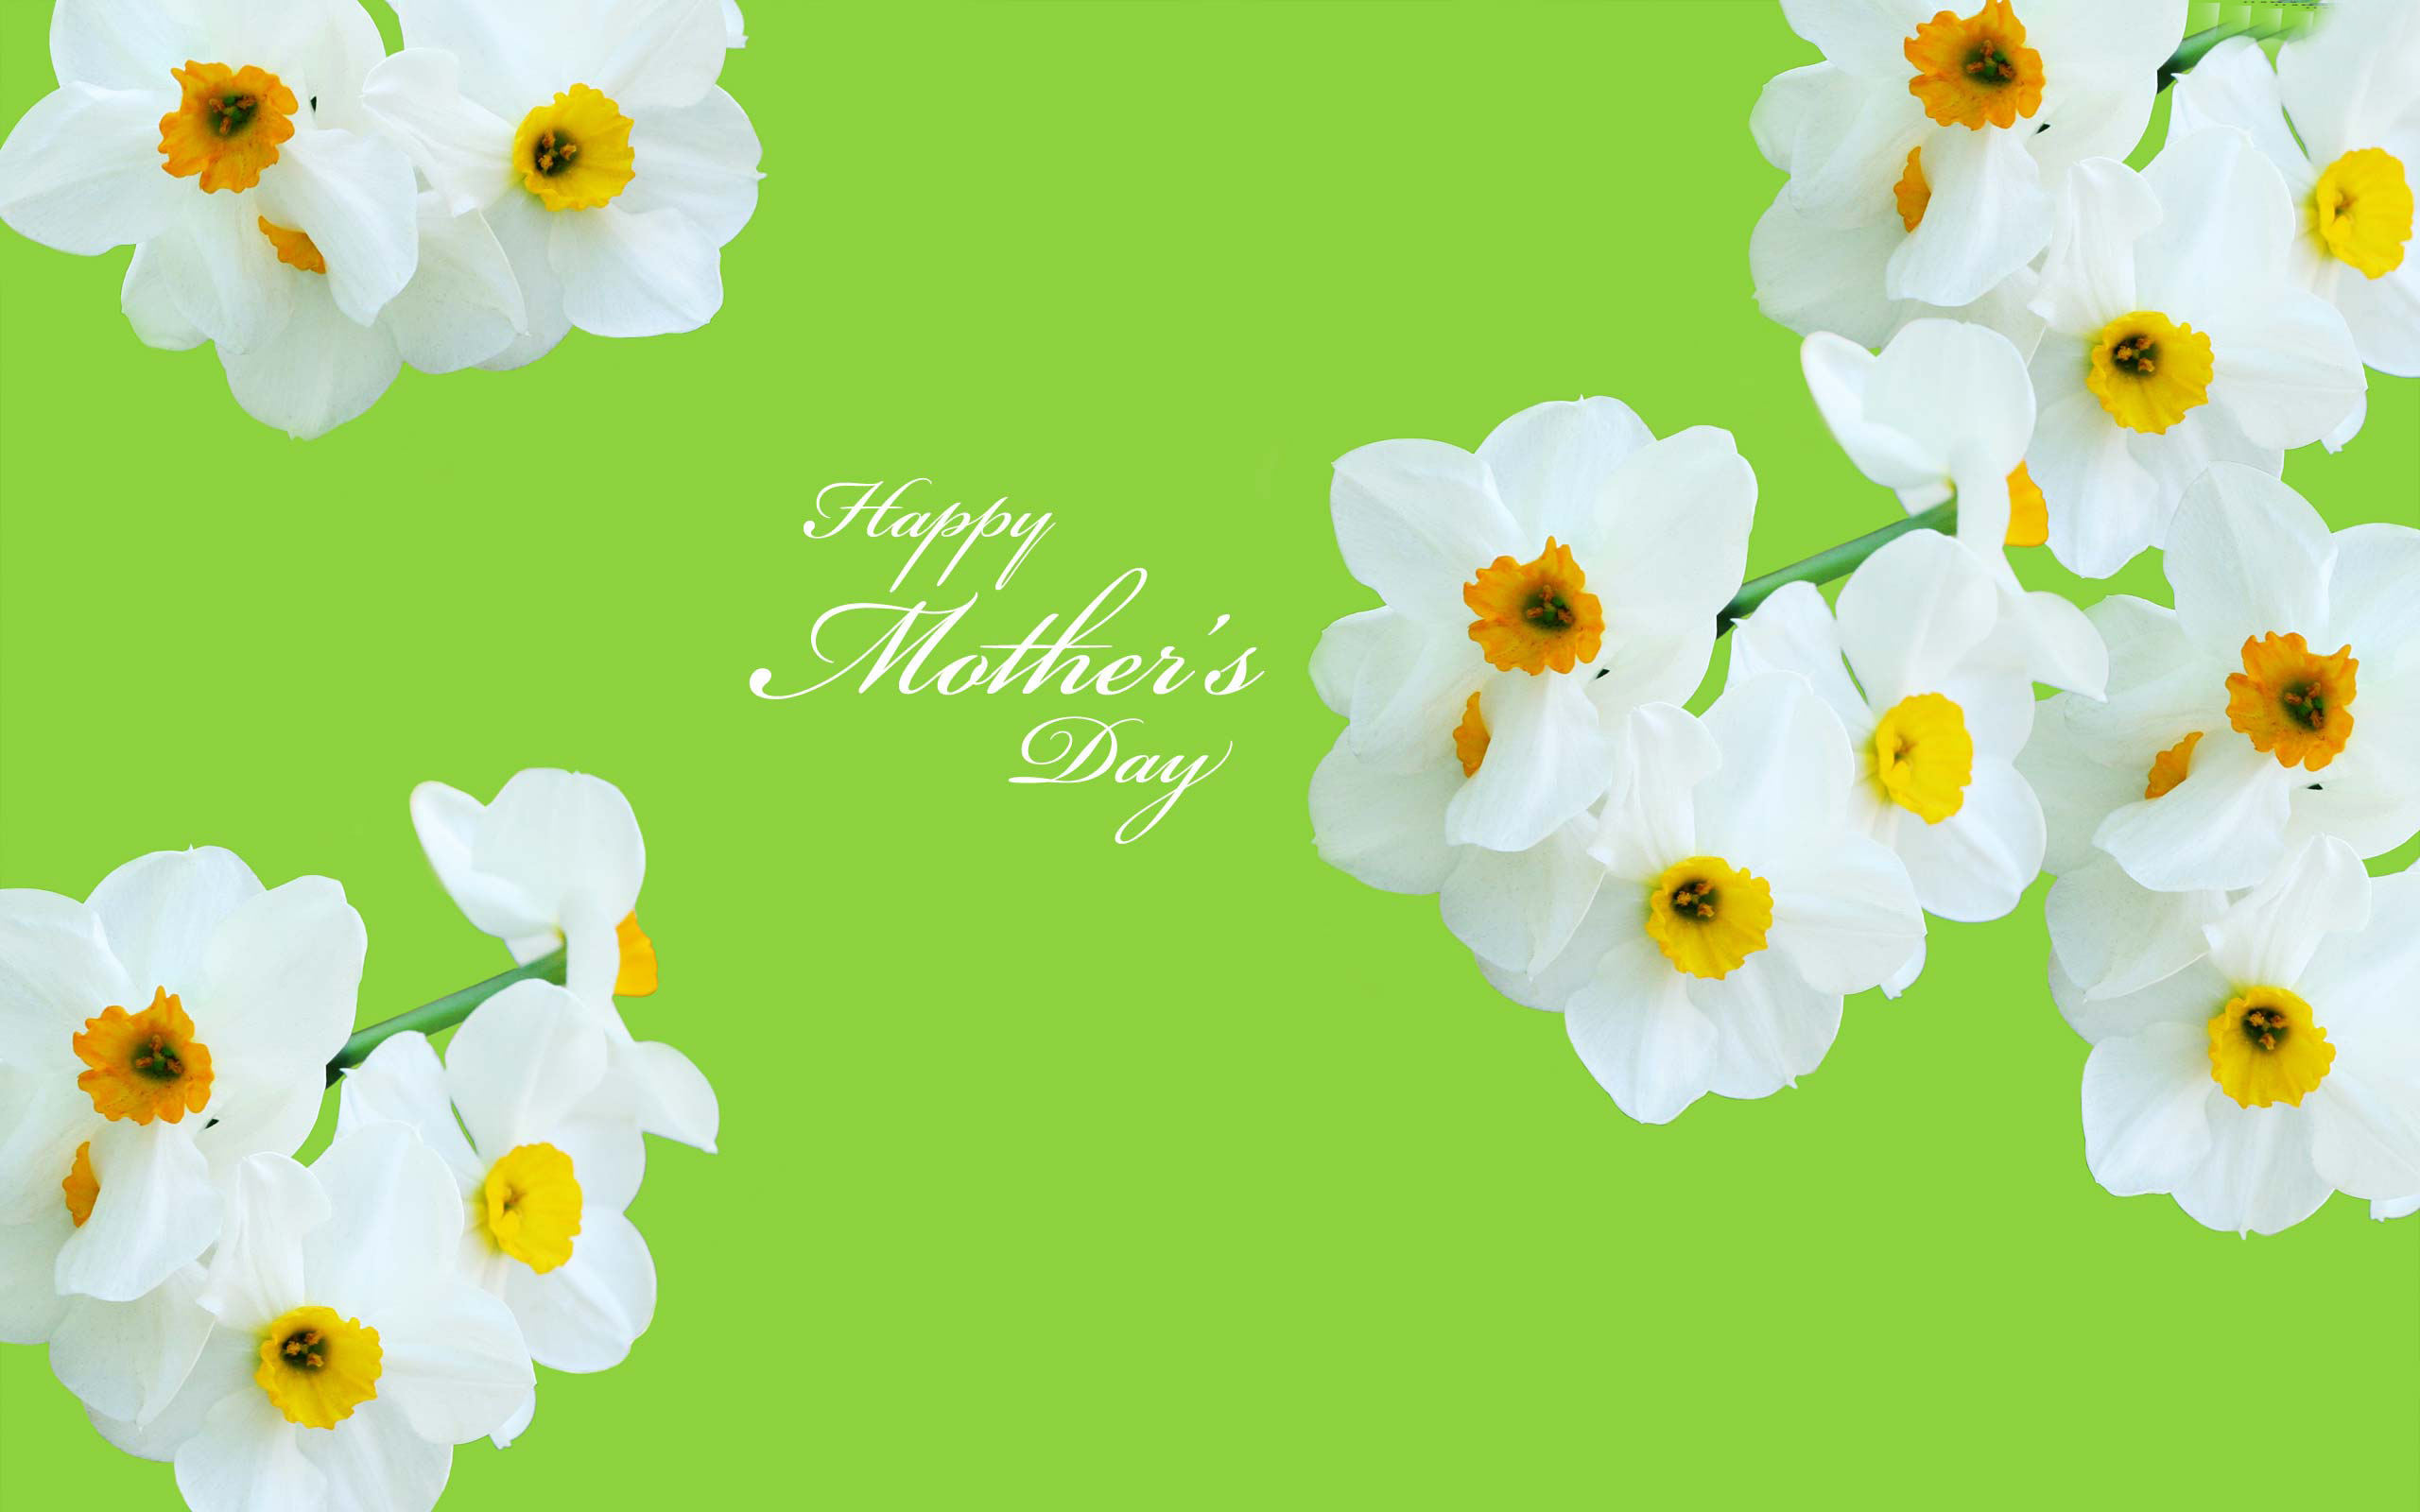 Mothers Day Wallpaper Ing Gallery